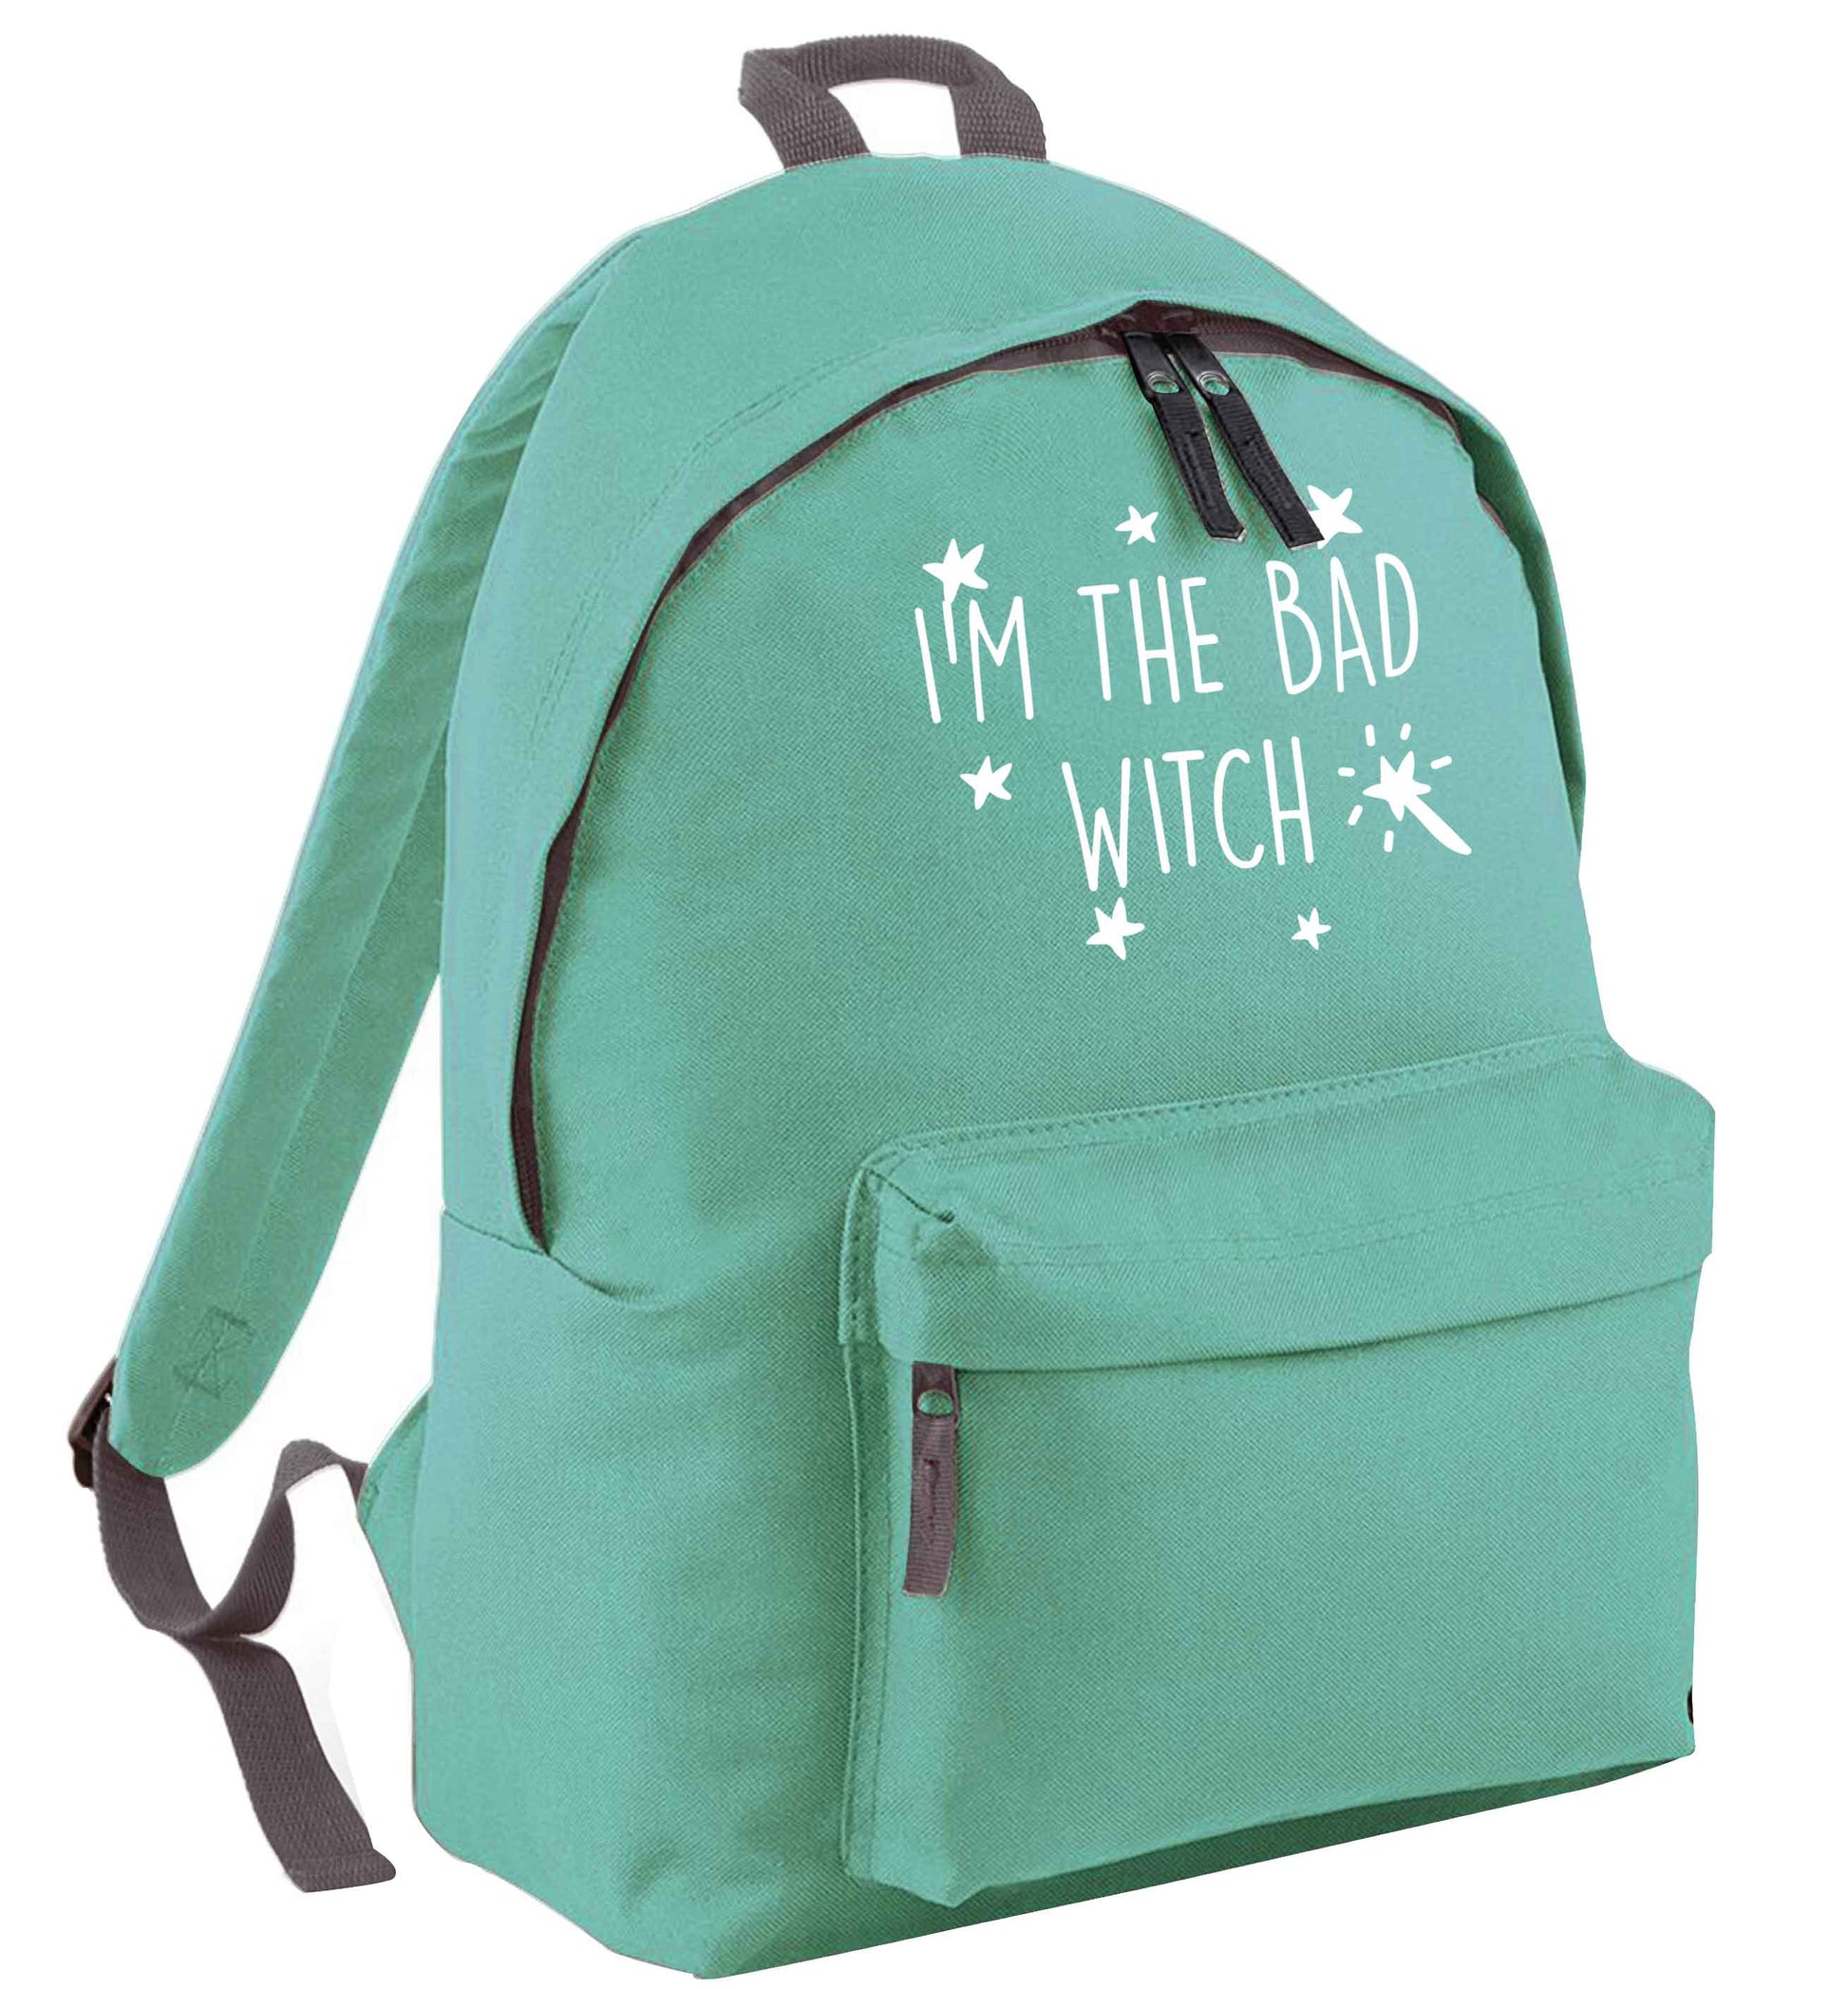 Bad witch mint adults backpack